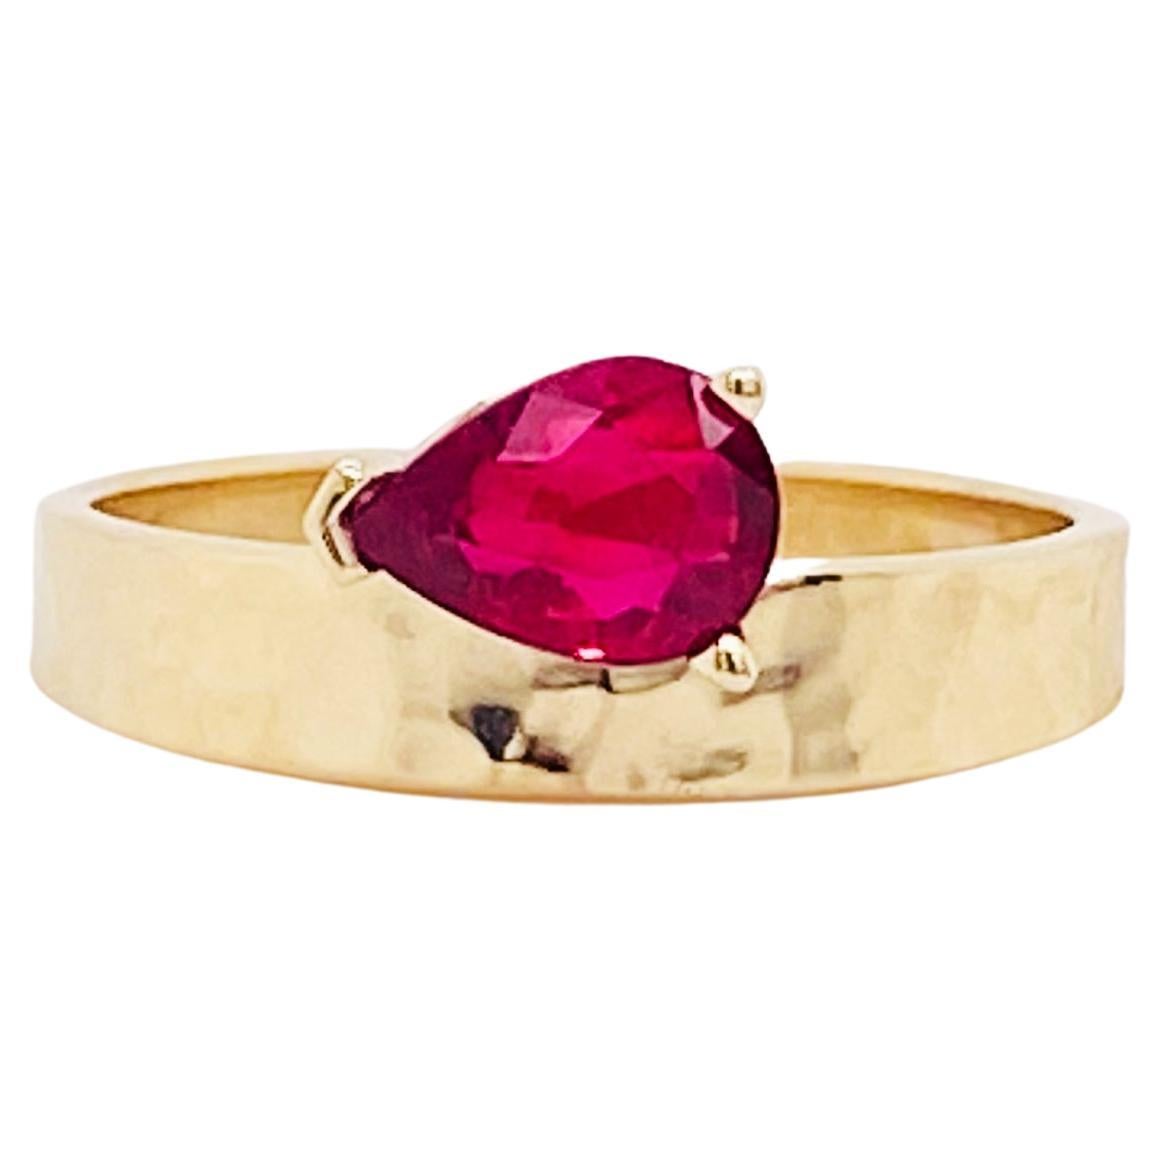 Custom Ruby Ring, Mary Rupert Design w 1.00 carat Marquise Ruby set East to West